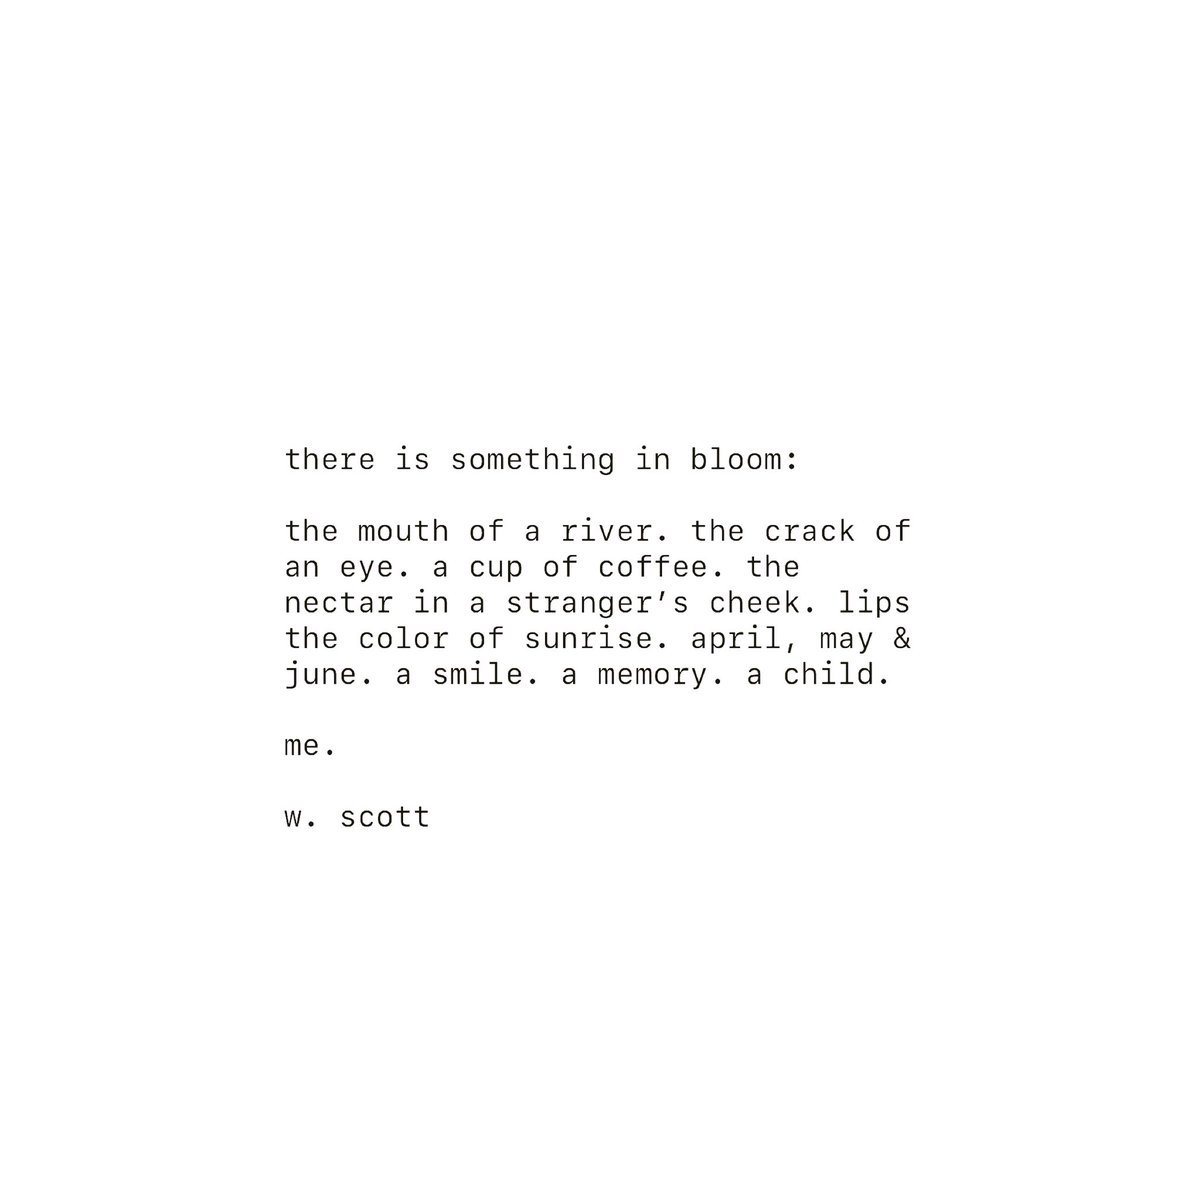 there is something in bloom 

#growthmindset #growingpains #writingcommunity #poetrycommunity #writtenwords #sunlight #instagrampoetry #wscottauthor #poetrymatters #poetaccount #blackpoetrymatters #supportblackartists